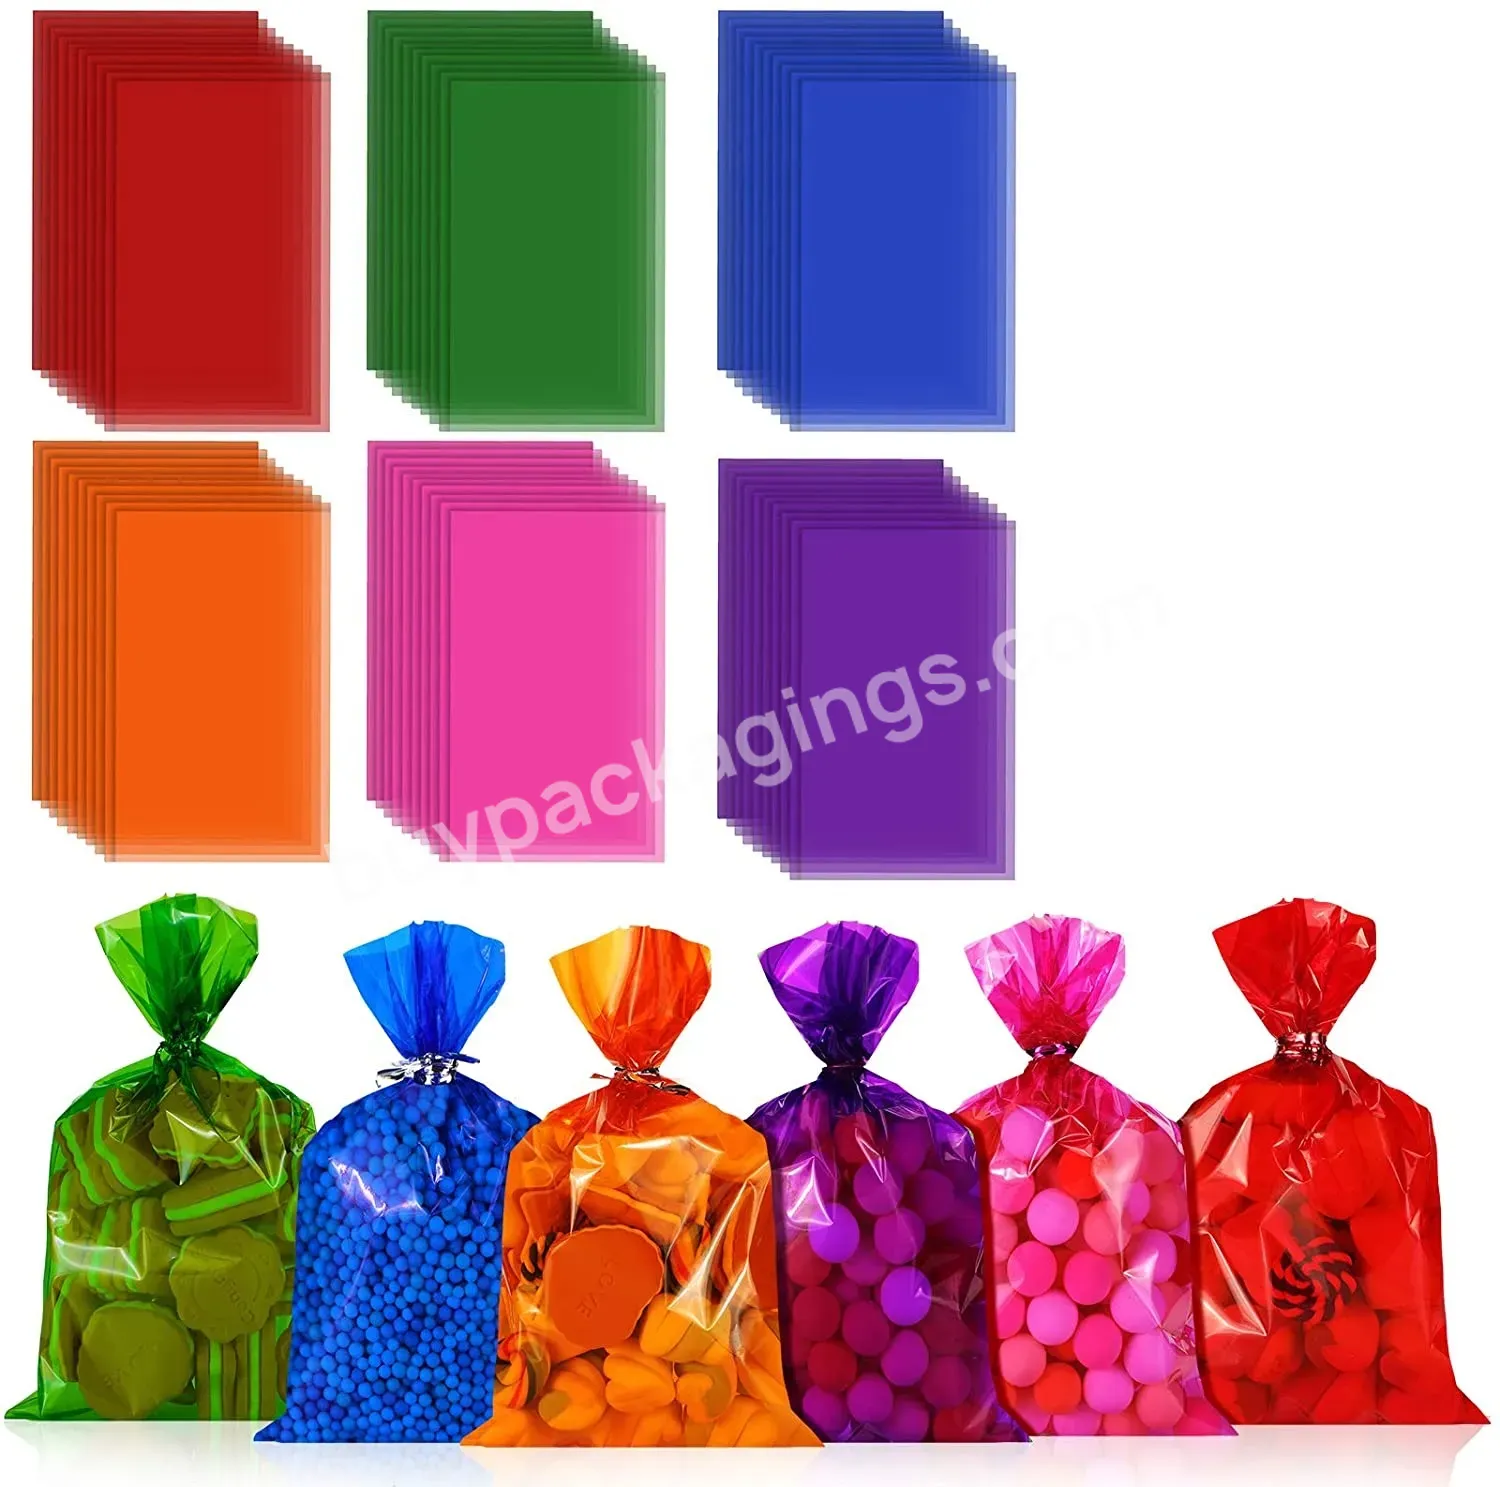 Christmas Cellophane Bags Christmas Treat Bags Candy Gift Bags With Twist Ties For Christmas Theme Party Supplies - Buy Christmas Cellophane Bags,Christmas Treat Bags,Candy Gift Bags With Twist Ties.